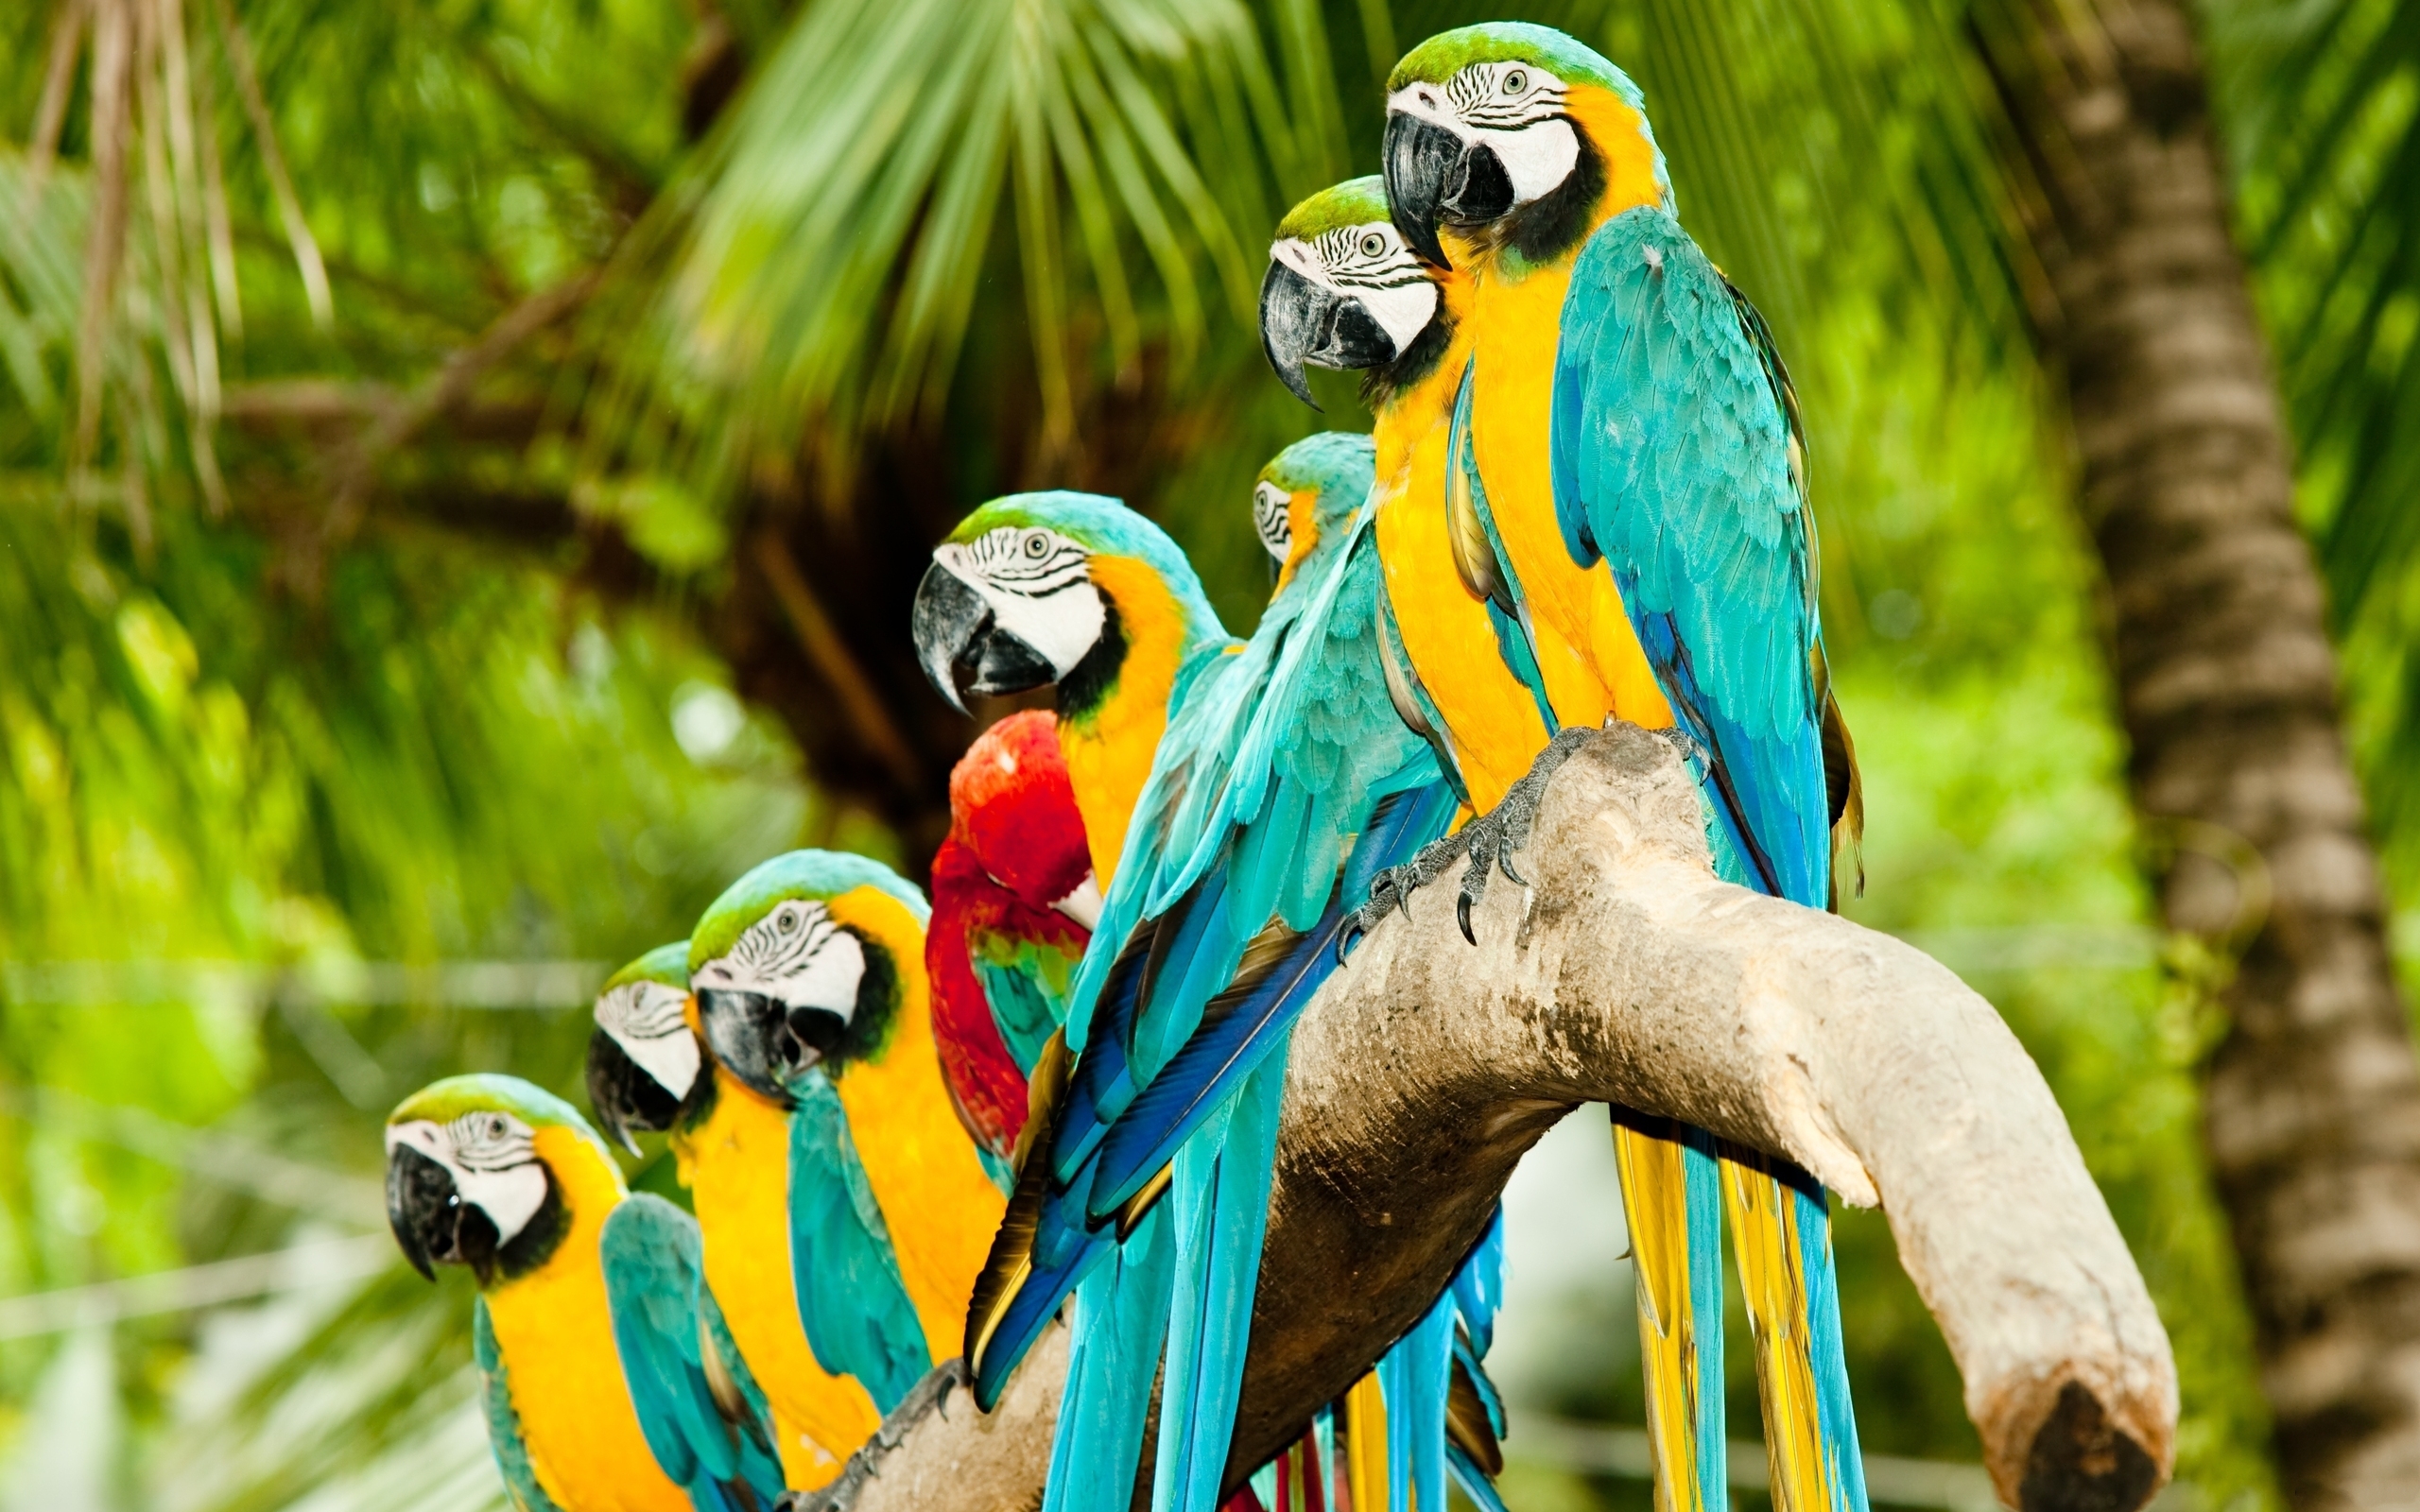 Tropical Animals Wallpapers